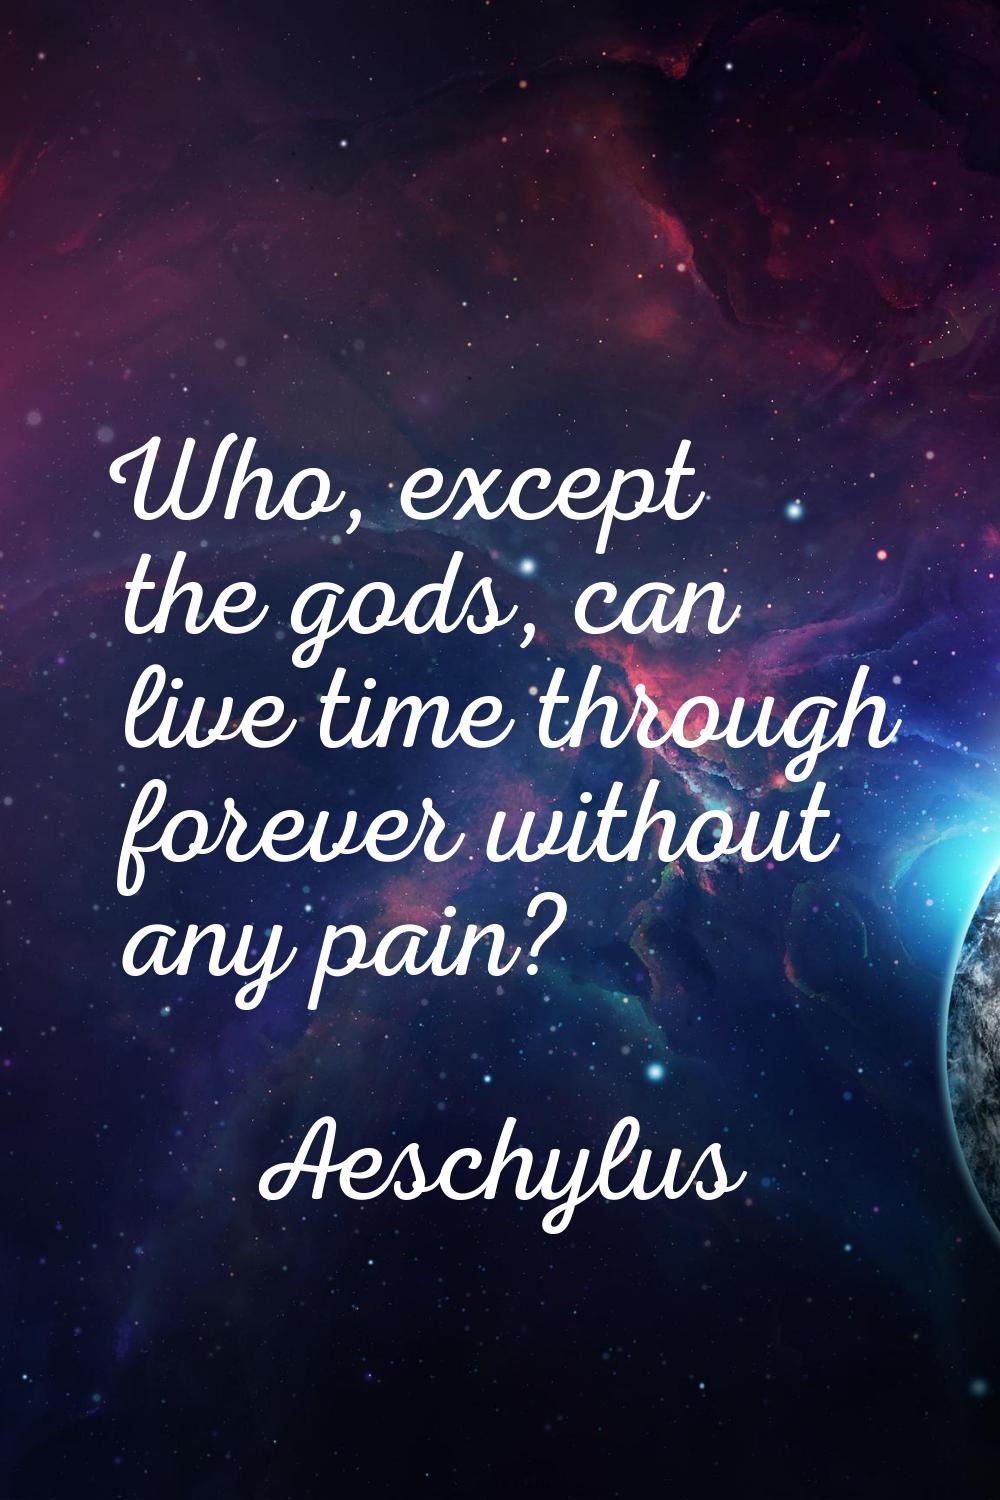 Who, except the gods, can live time through forever without any pain?